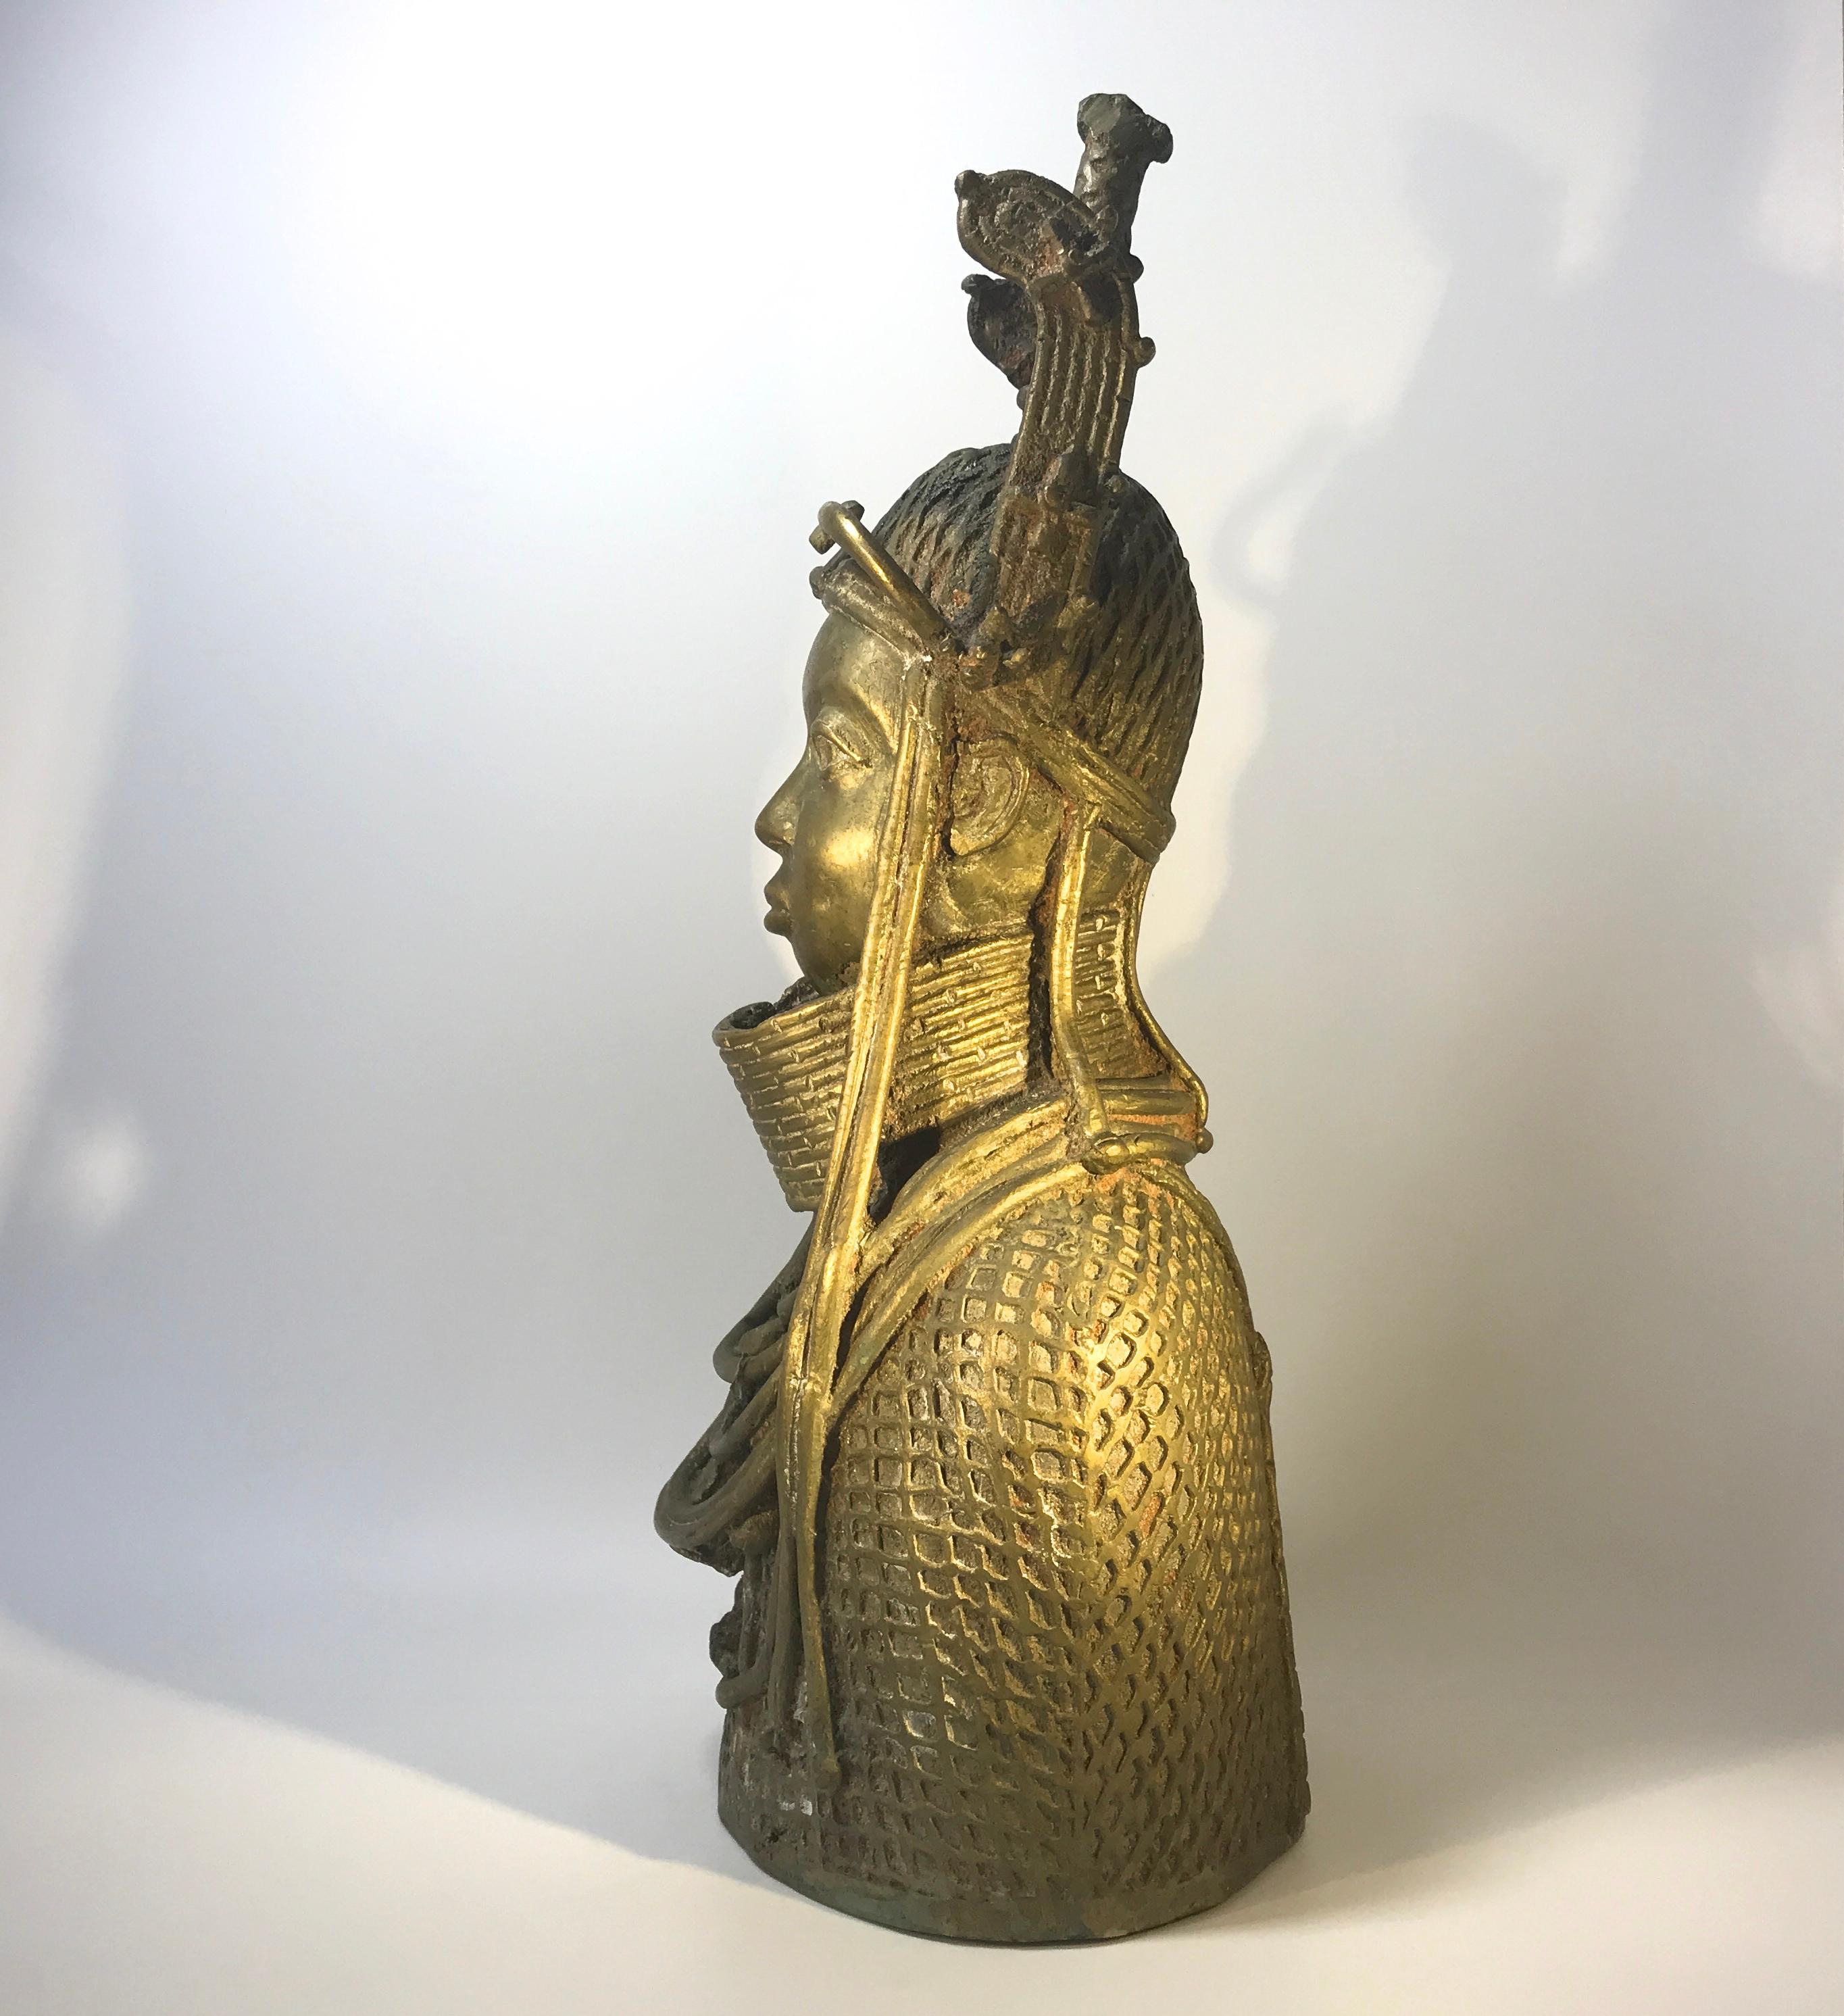 Impressive Benin Oda King Lost Wax 'Bronze' sculpture from the mid-20th century
Centuries old, the 'Lost Wax' method involves a mold created in wax and the molten metal poured in. The wax melts - or is 'lost', leaving the cast piece.
Measures: